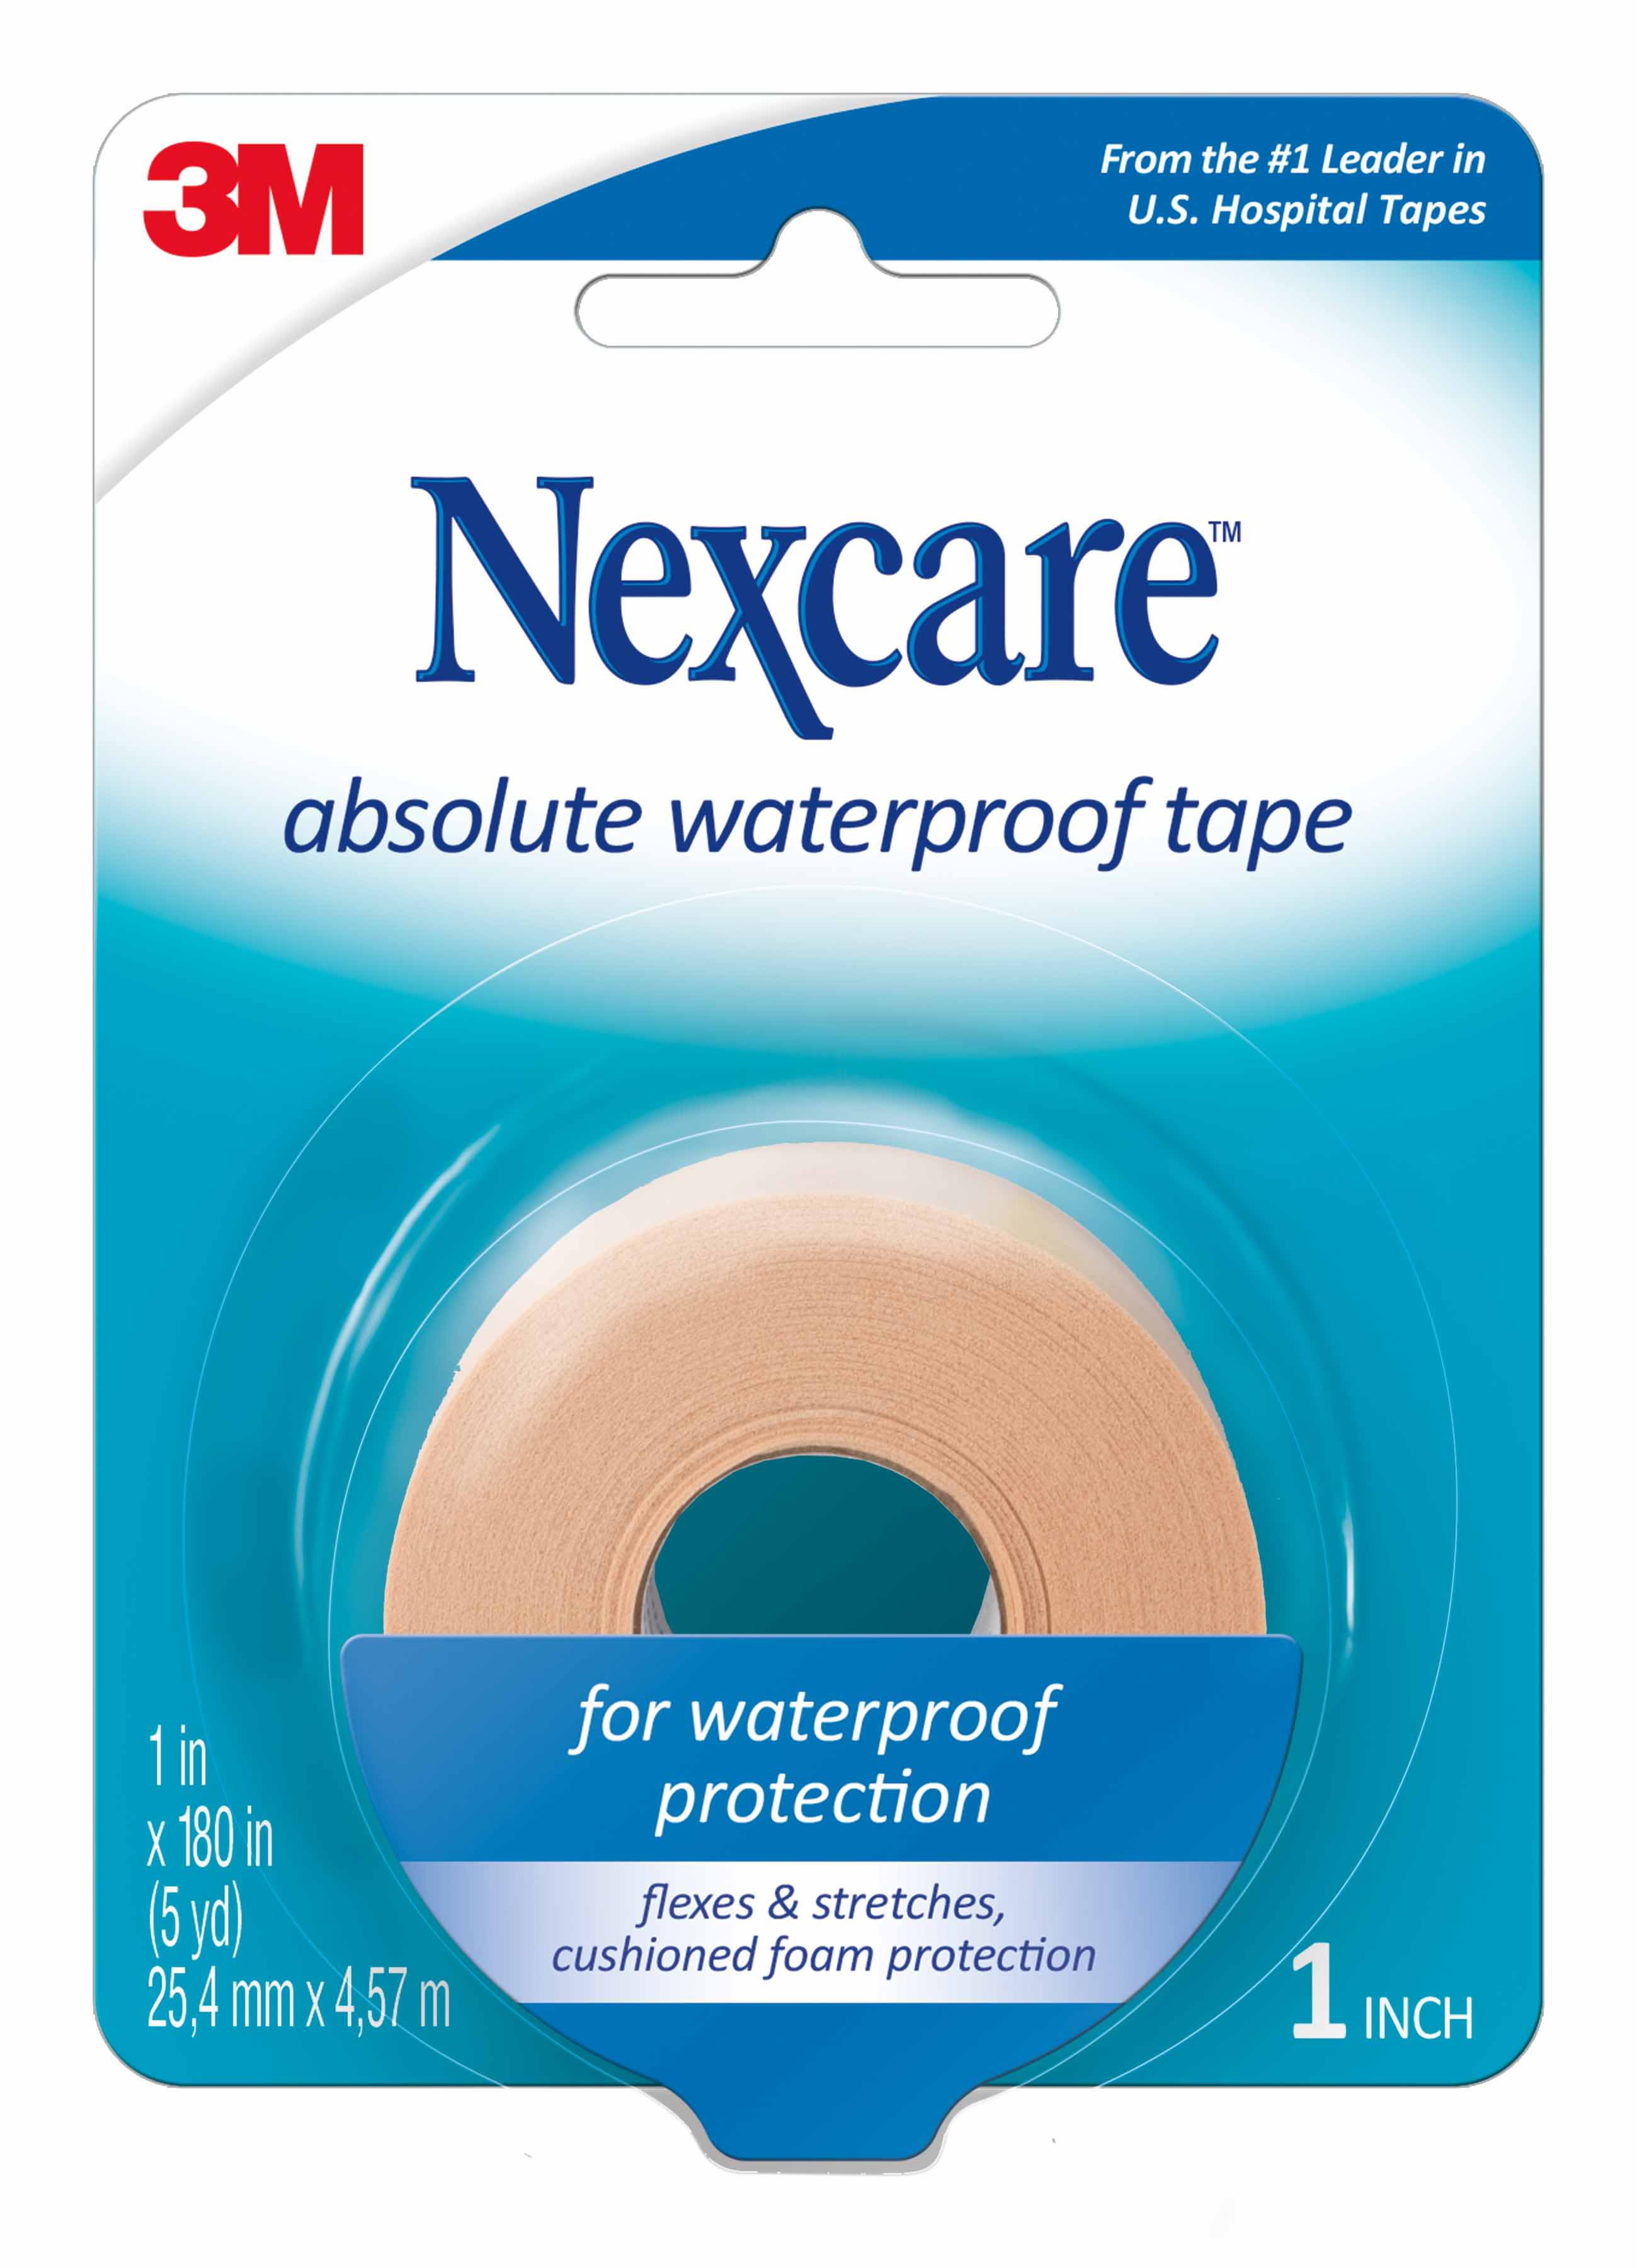 Choosing Medical Tape for Wound Care